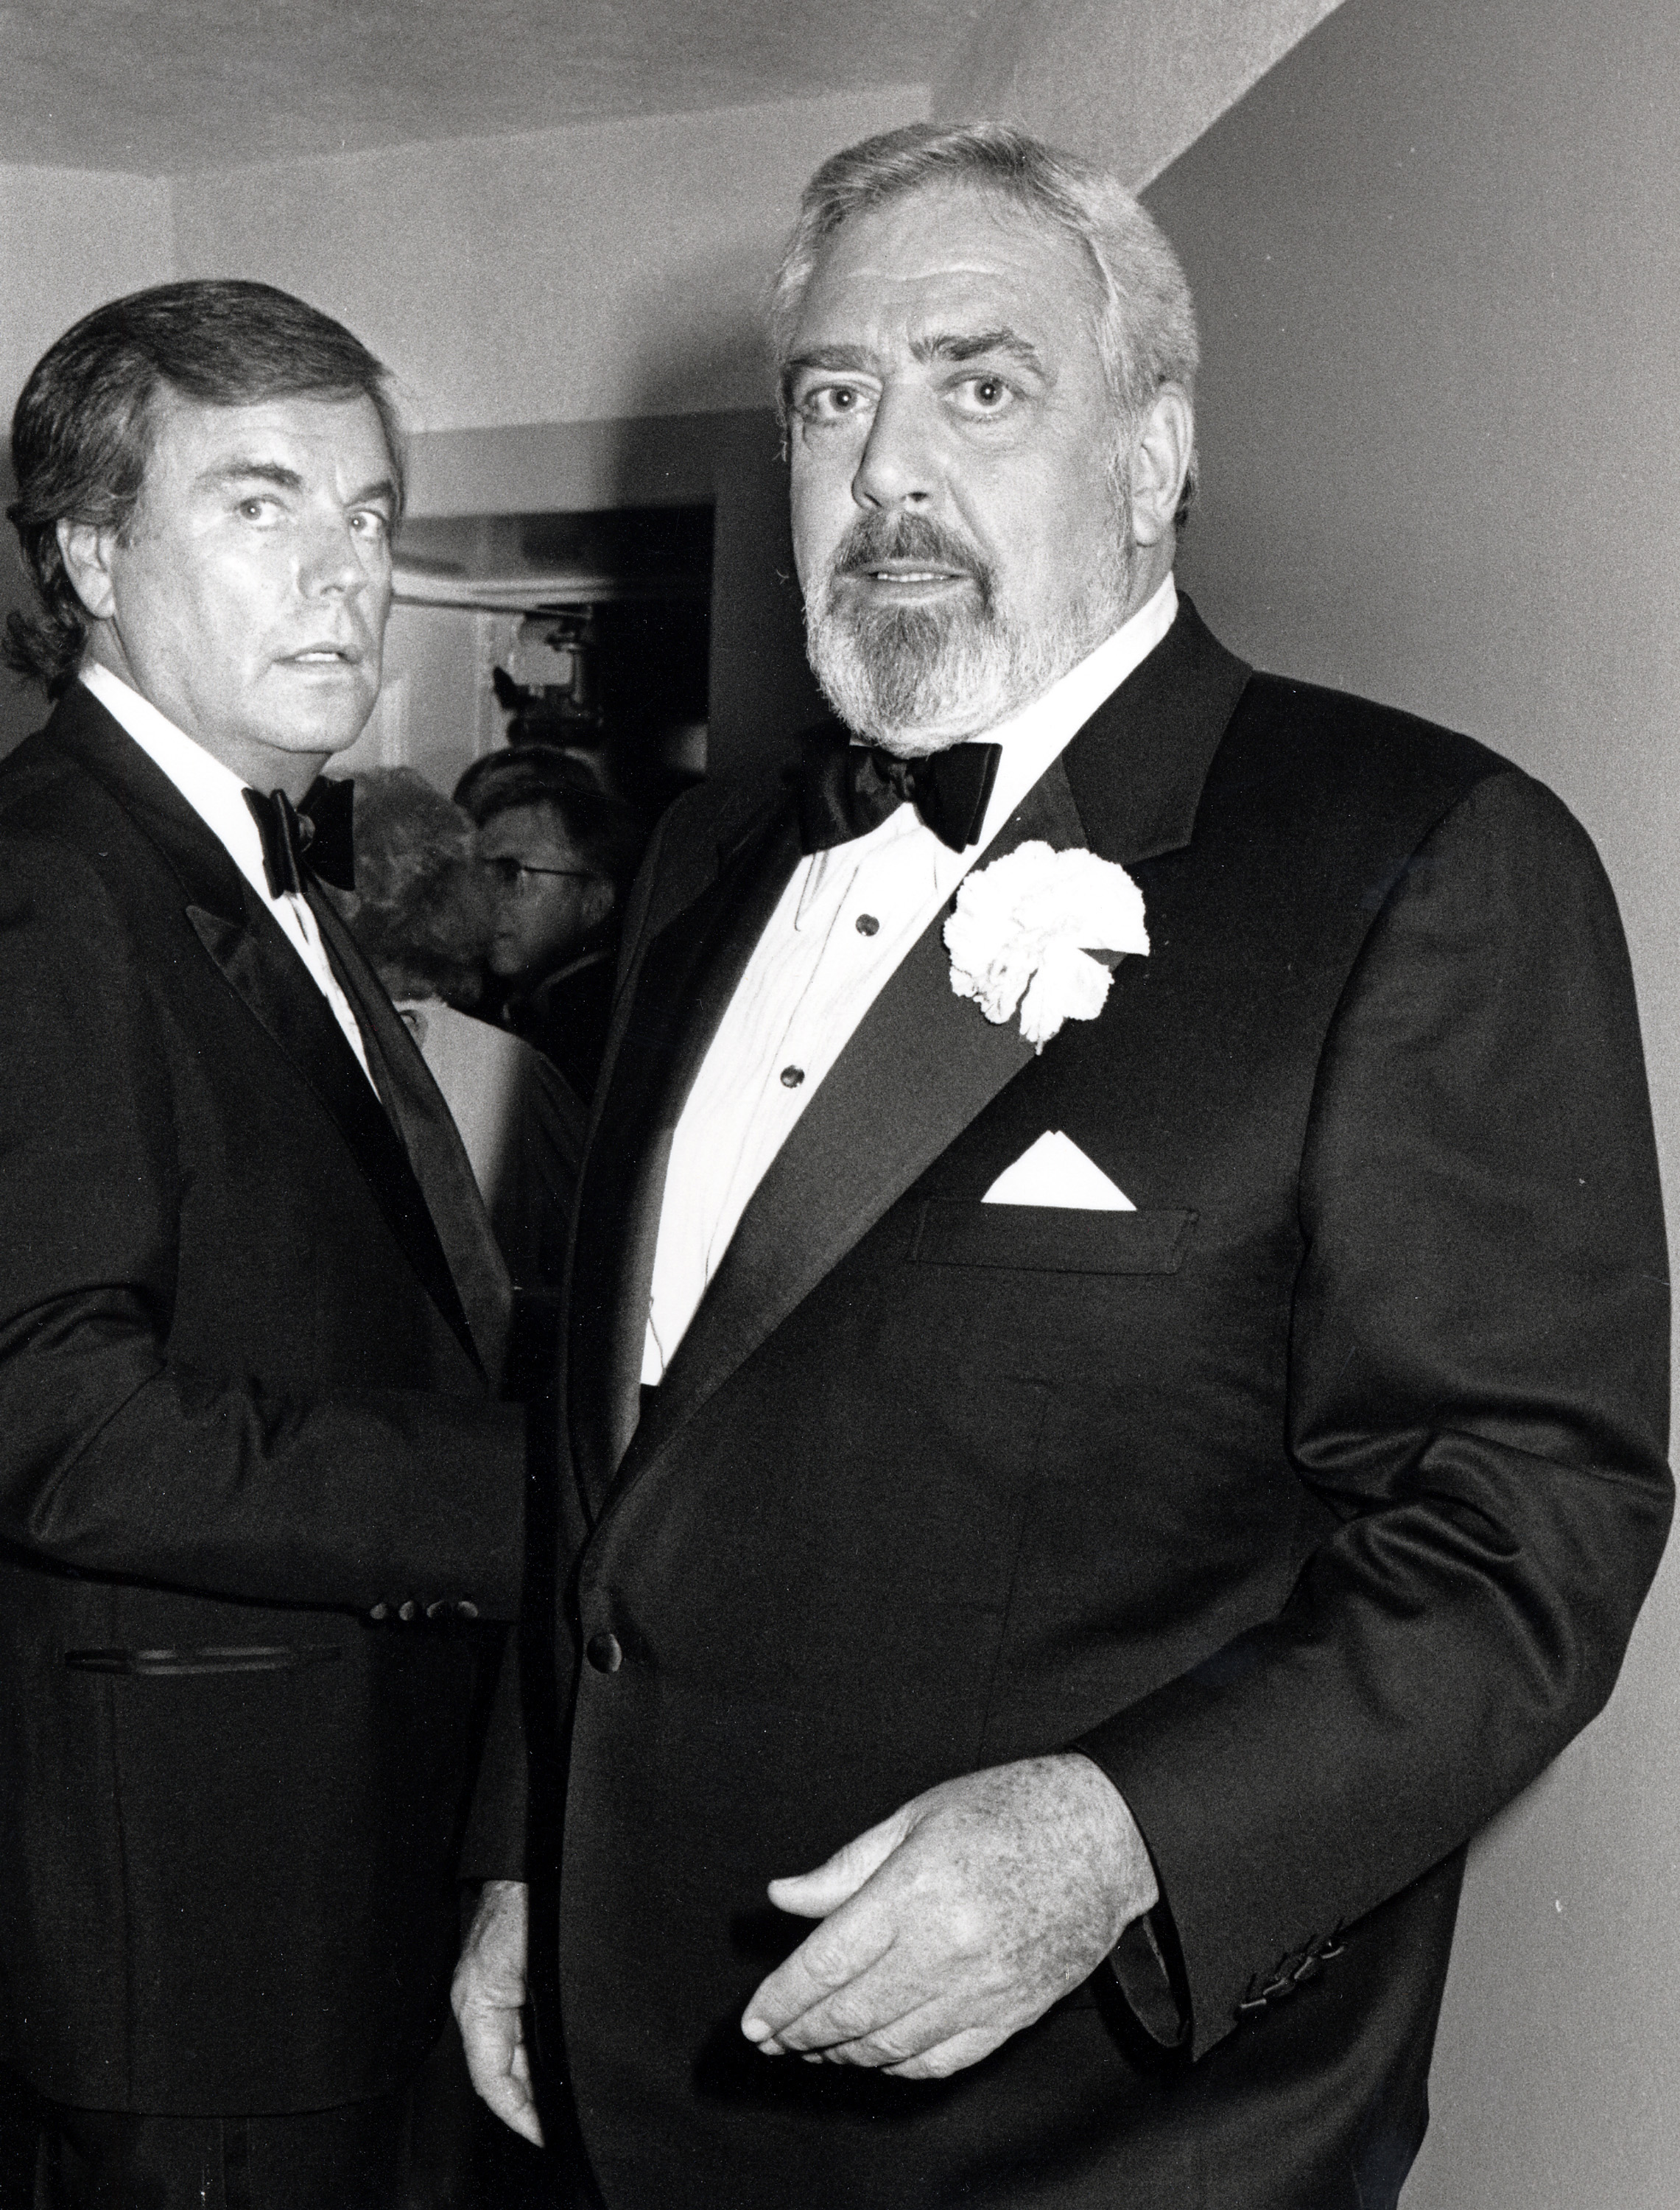 Robert Wagner and Raymond Burr at Pasadena Civic Auditorium in Pasadena, California, United States, 1986 |  Source: Getty Images